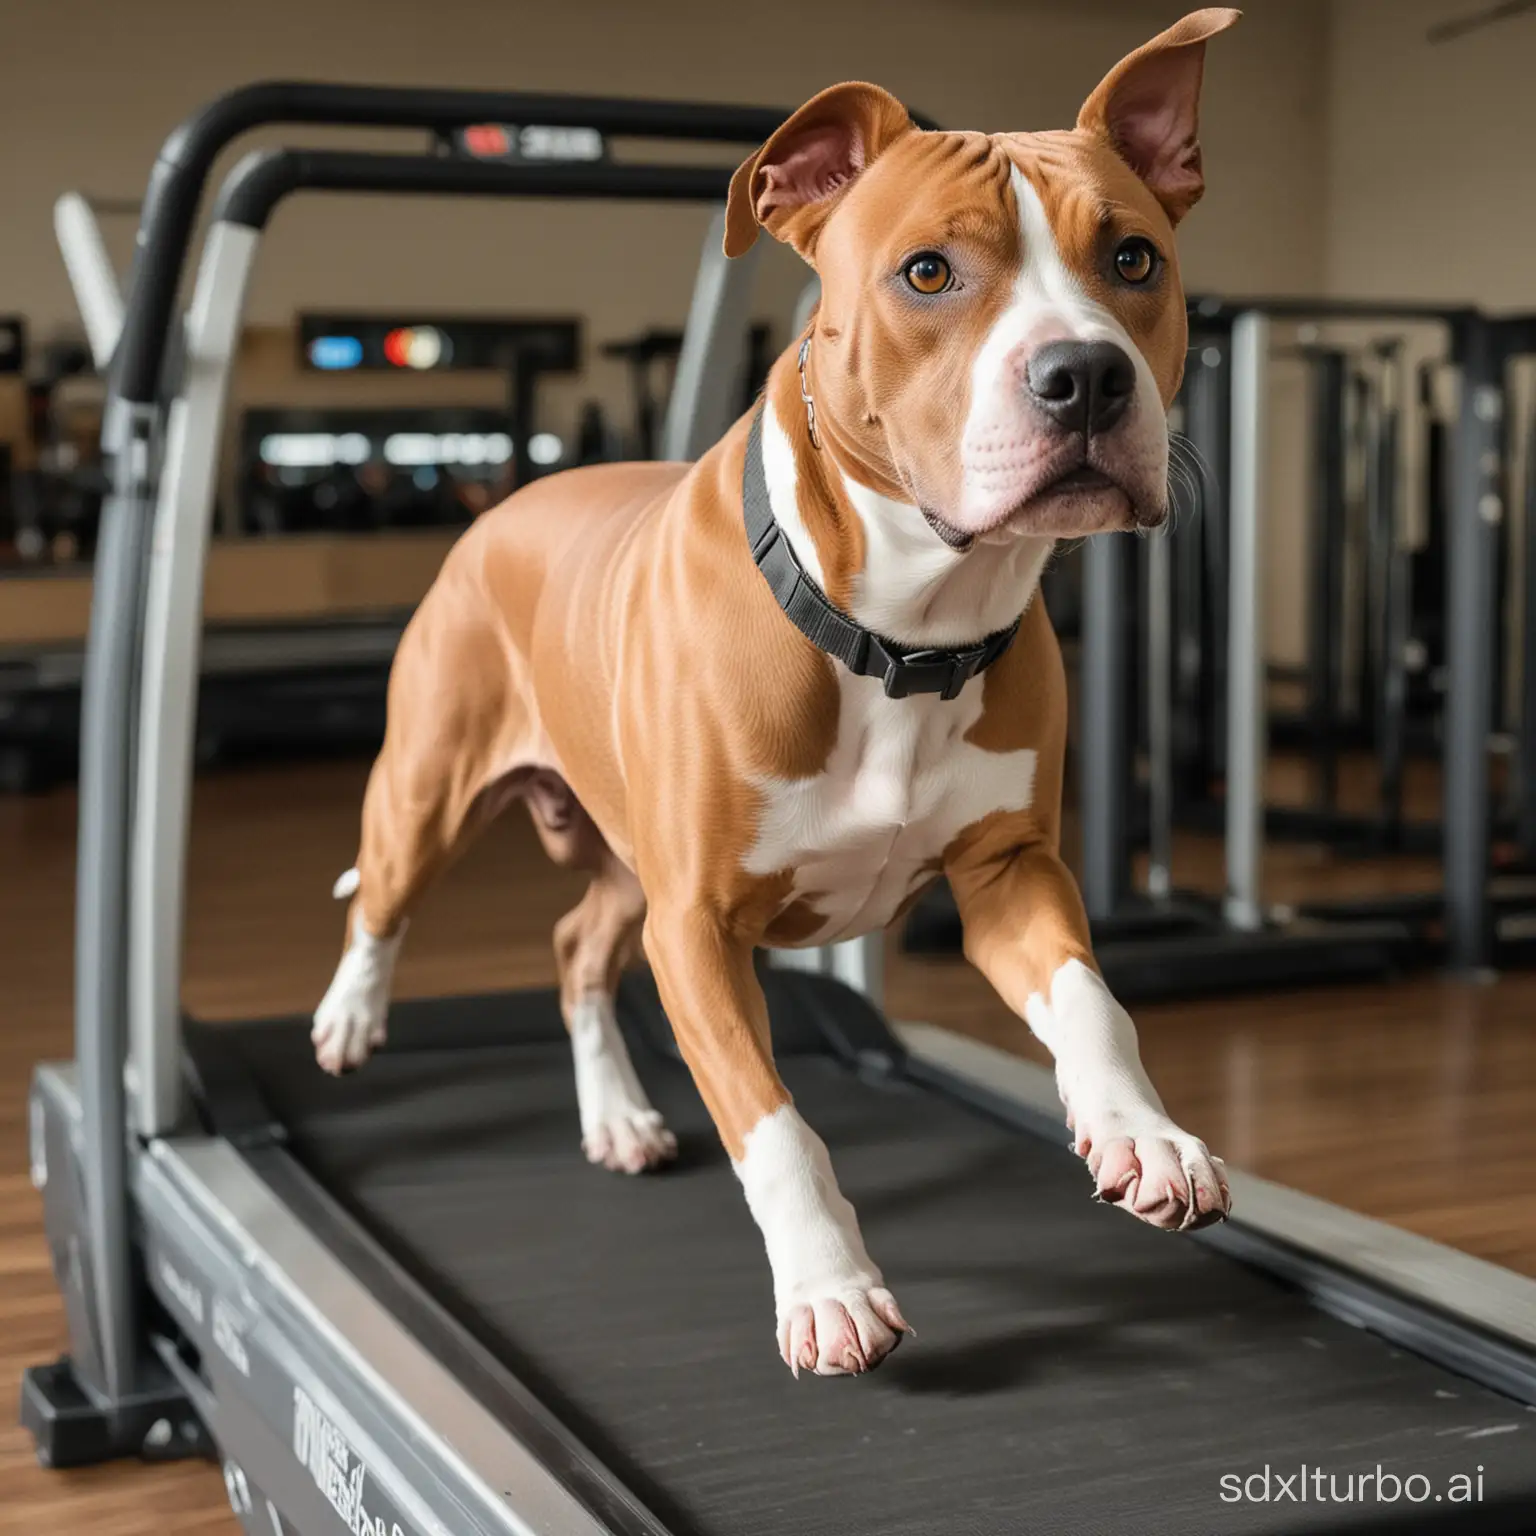 A American Staffordshire Terrier running on a treadmill, in the gym